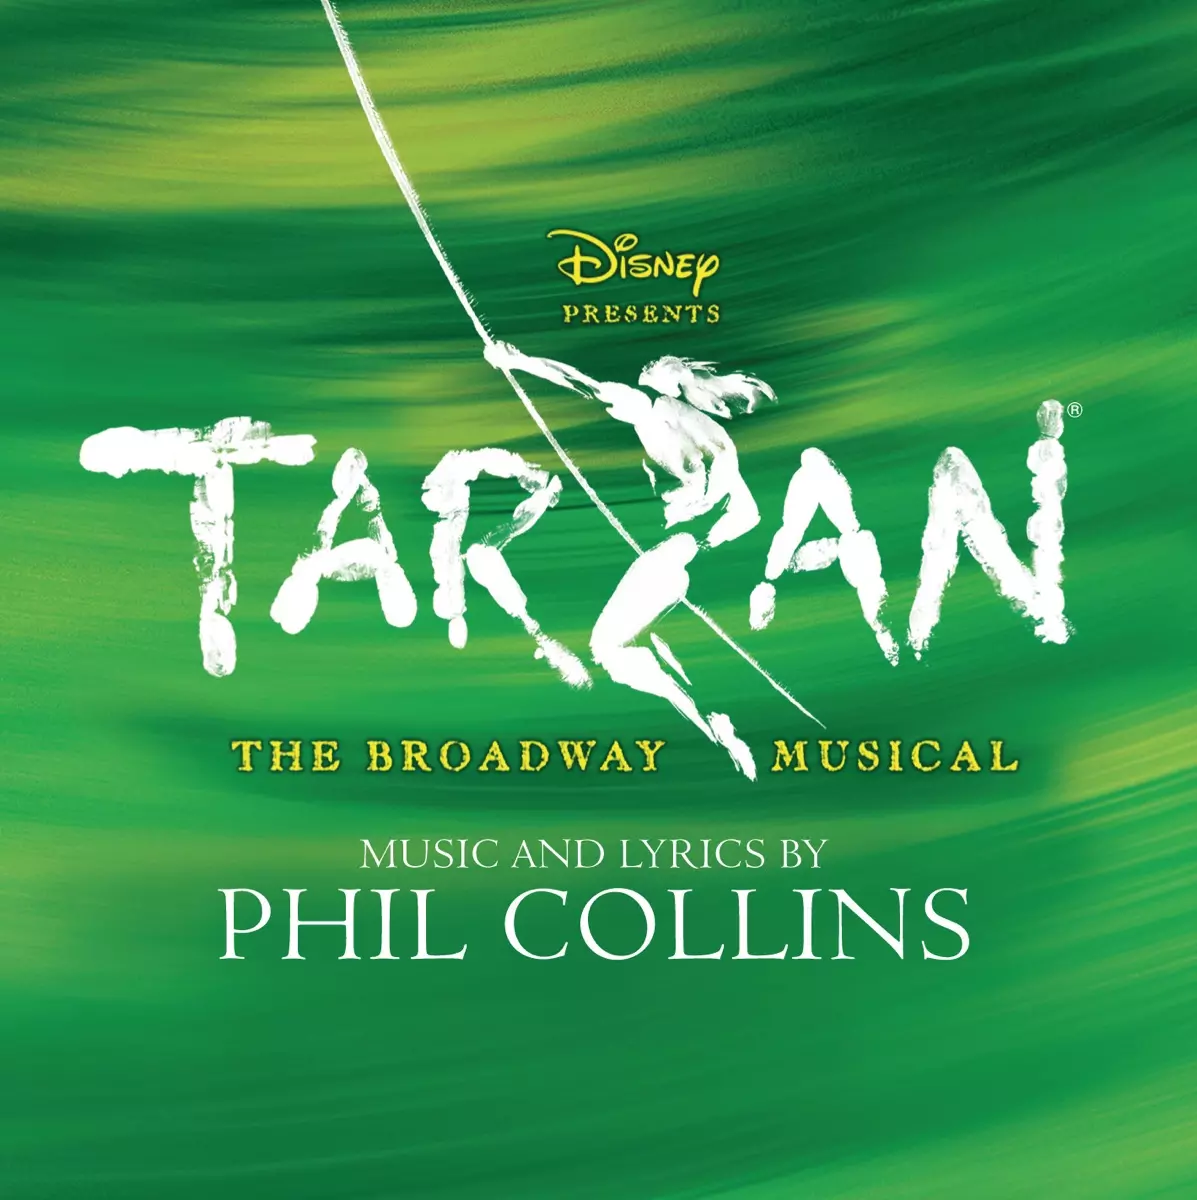 Tarzan (Original Motion Picture Soundtrack) by Phil Collins & Mark Mancina on Apple Music